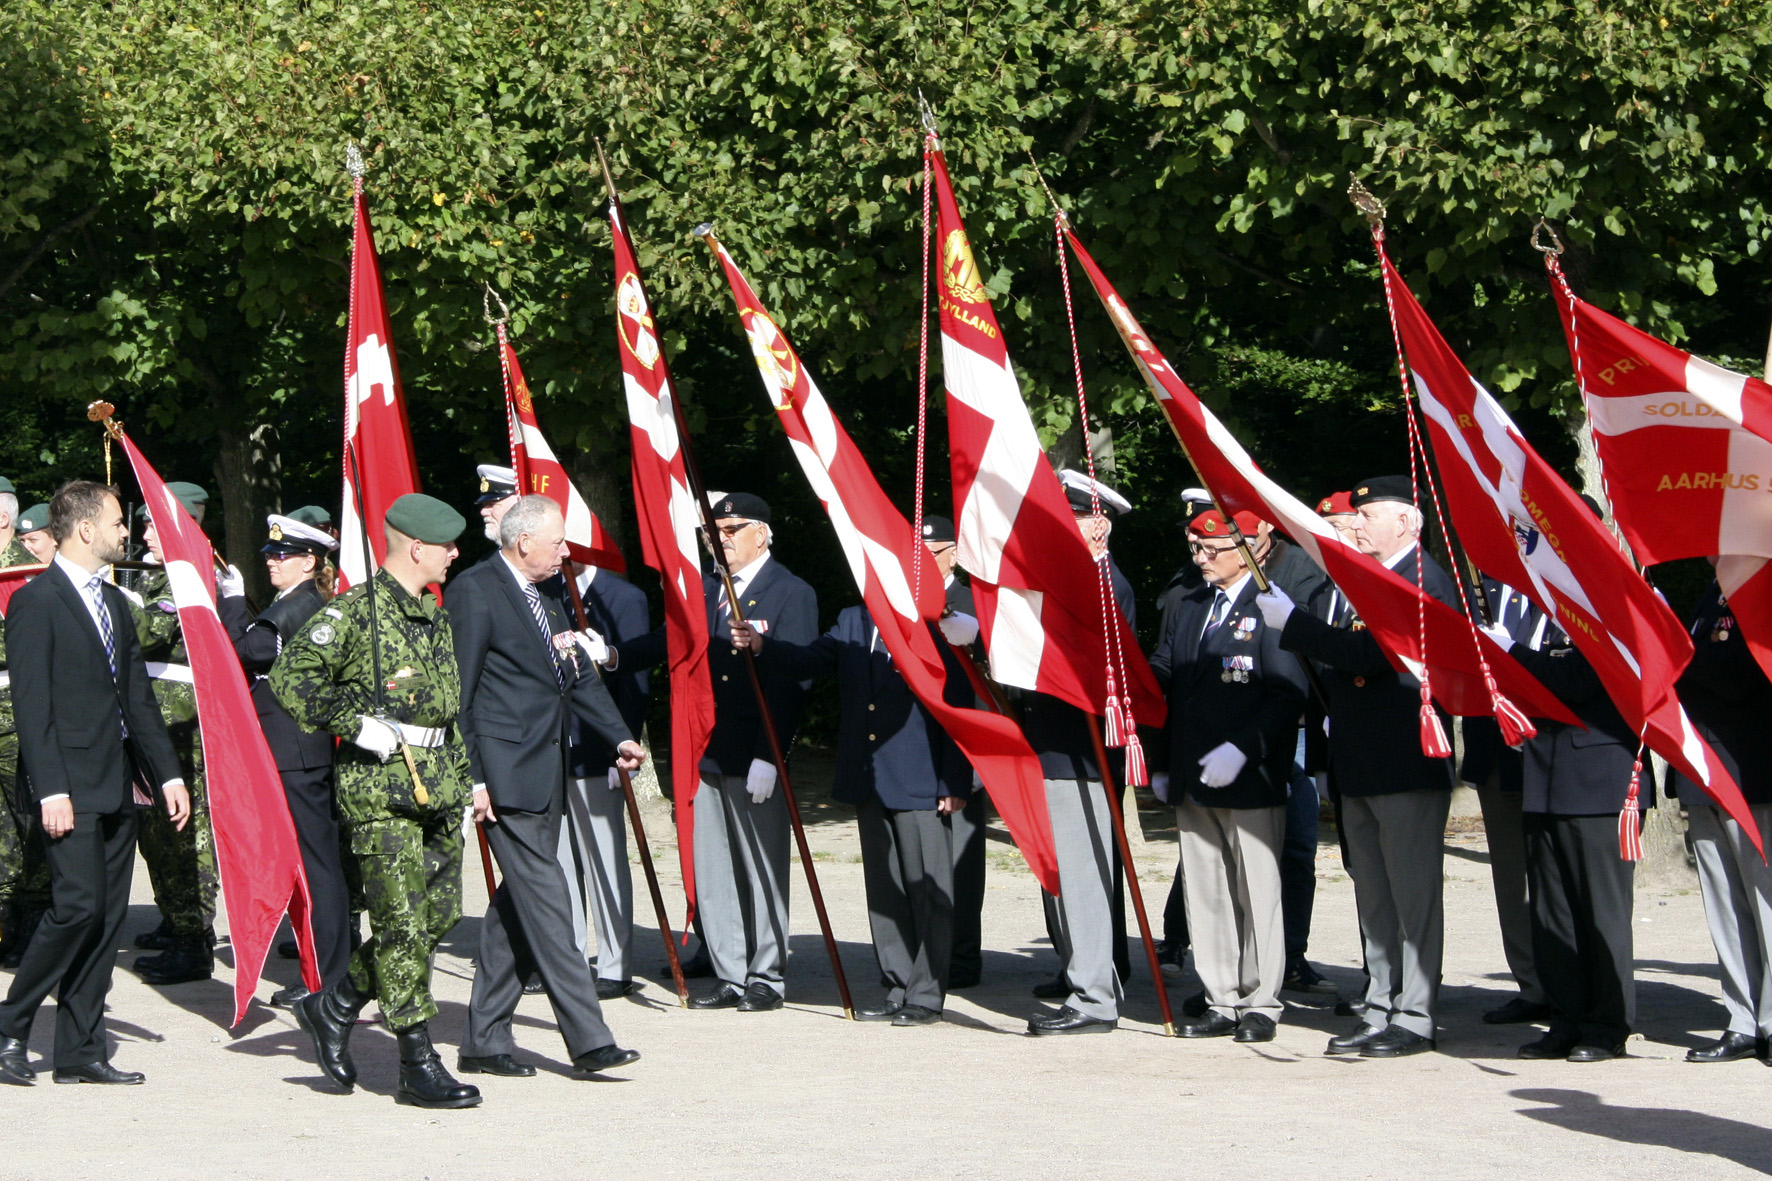 His Excellency count Ingolf inspects a line of standards held by members of local ex-servicemen’s clubs, the Memorial Park in Aarhus. Photo by Mads Daugbjerg